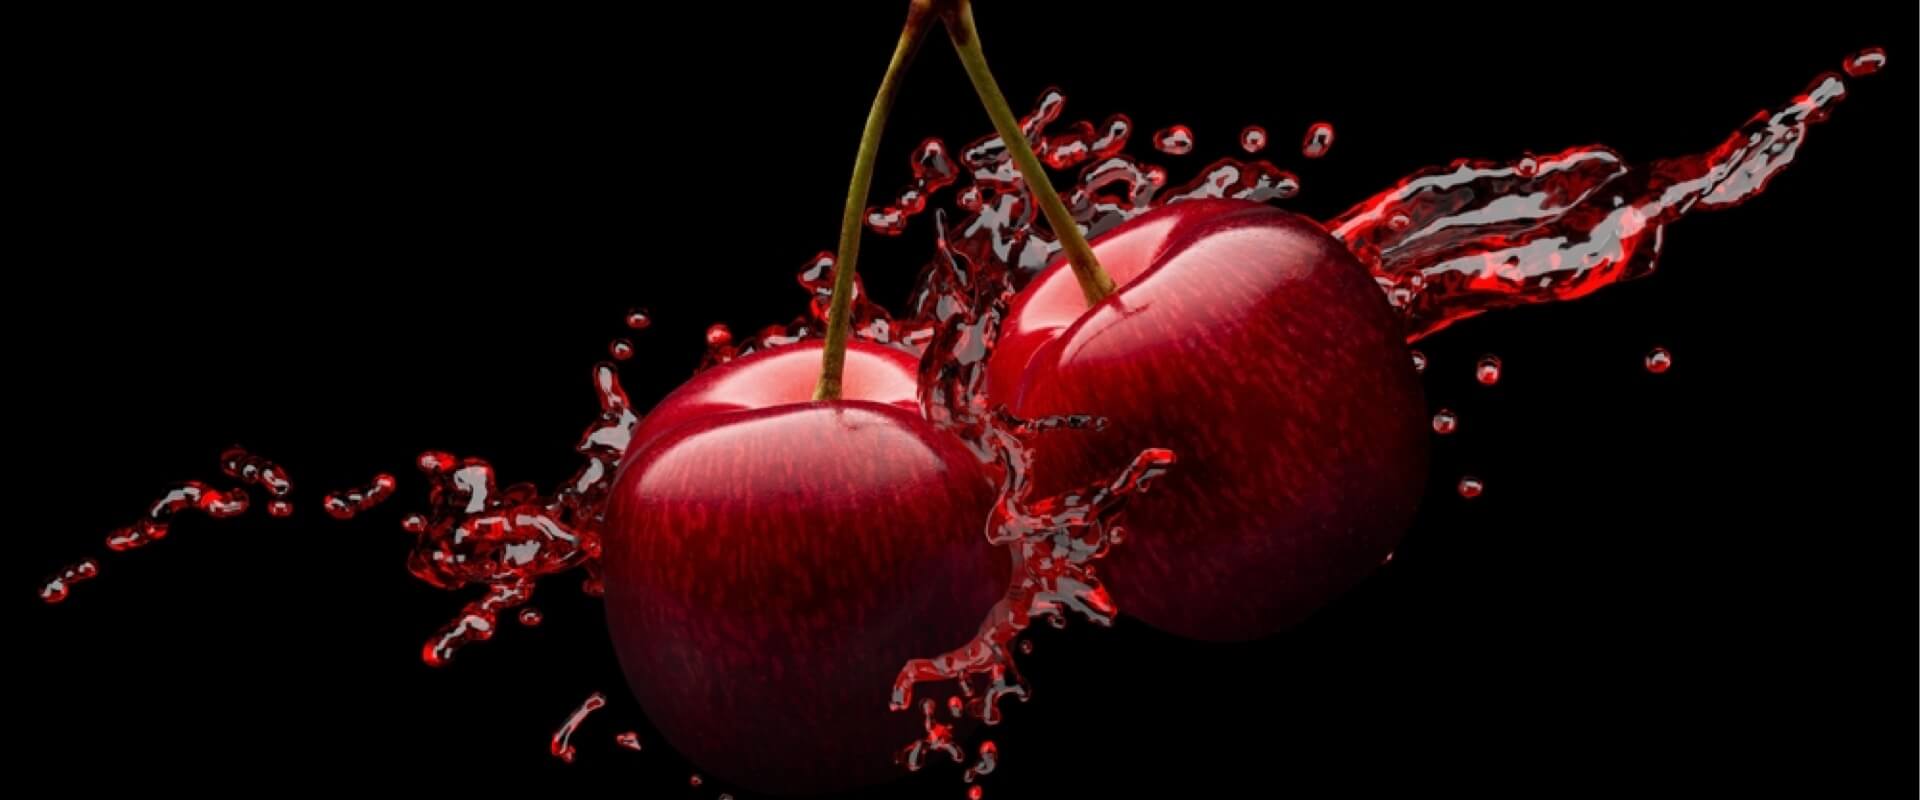 Black Cherry: The Sweet, Nutrient-Rich Fruit You Need to Know